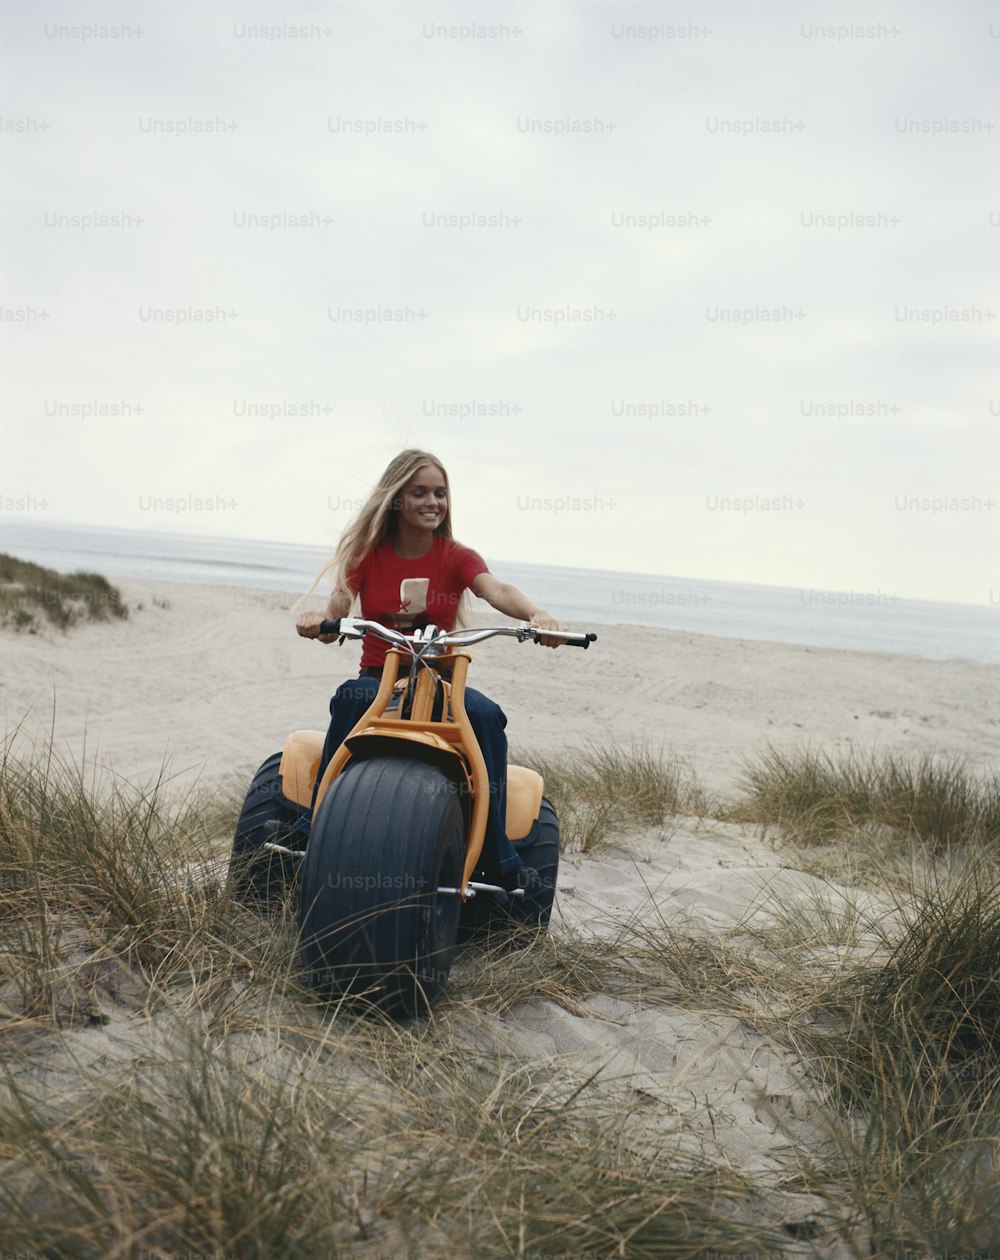 a woman is riding an inflatable vehicle on the beach